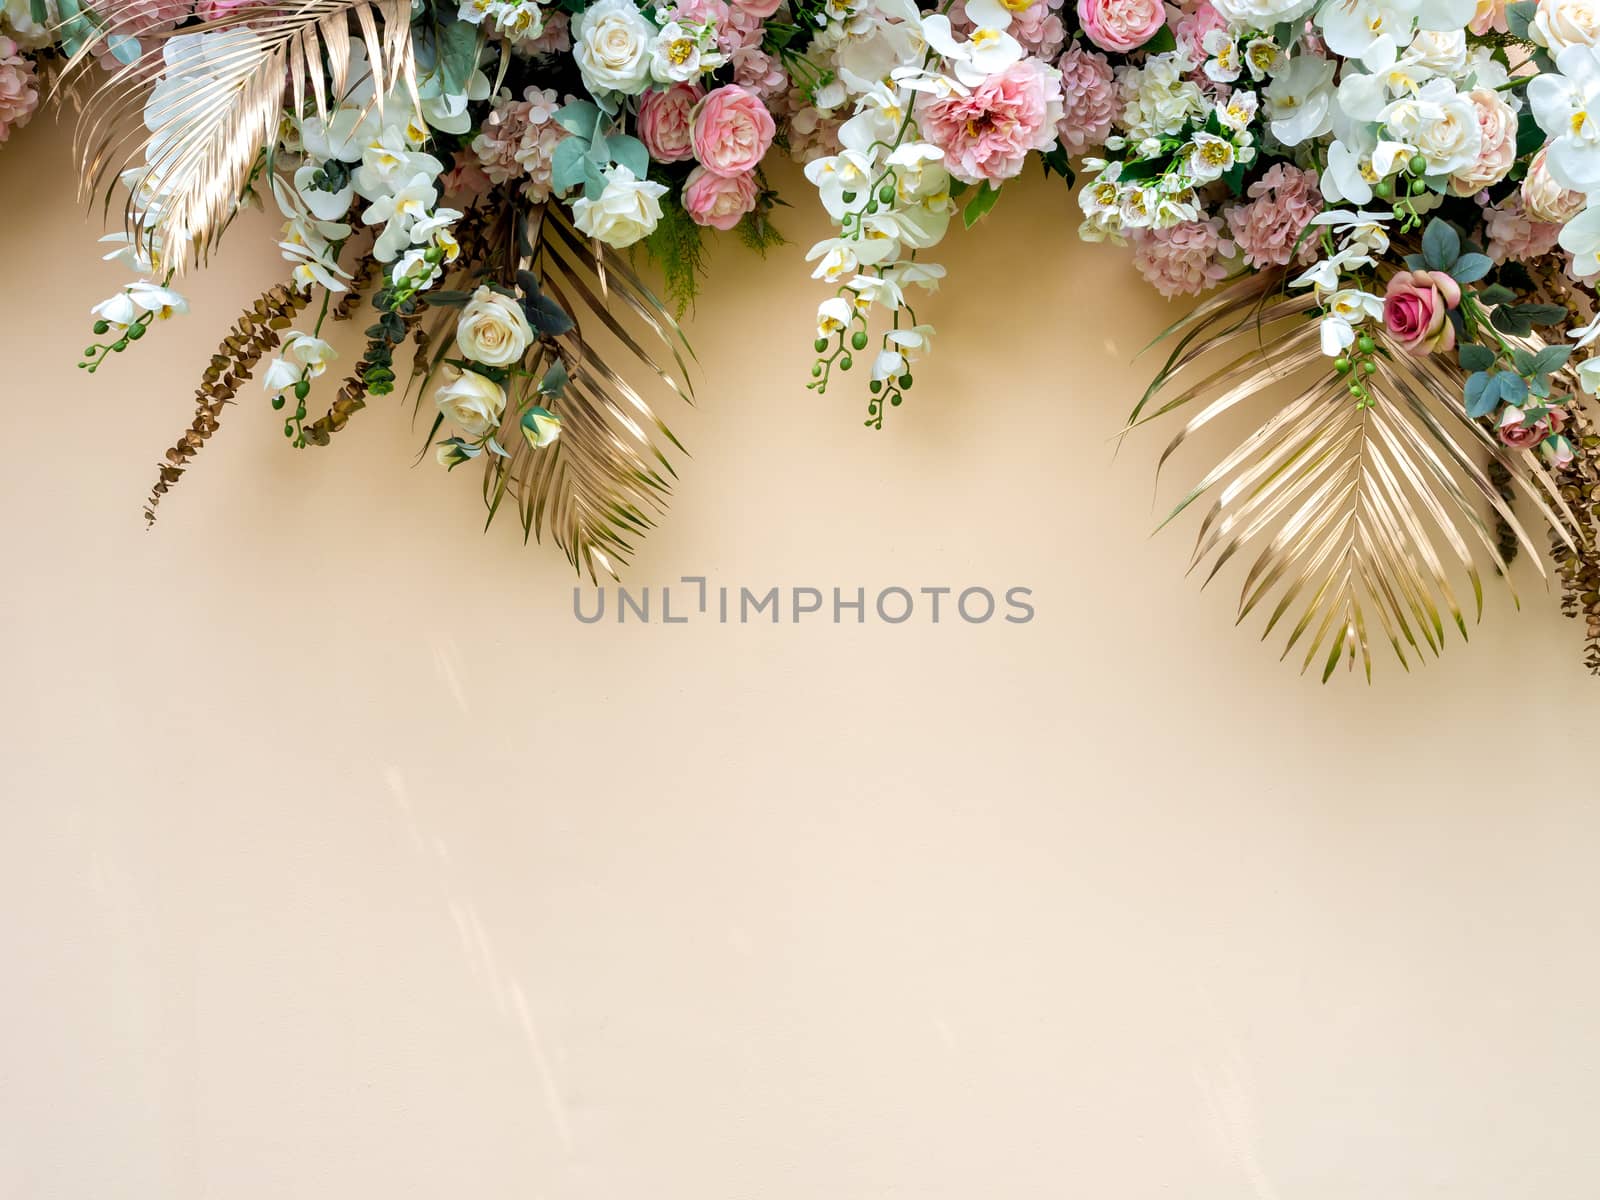 Celebration decoration background with gold tropical palm leaves with white and pink roses flower bouquet with copy space.